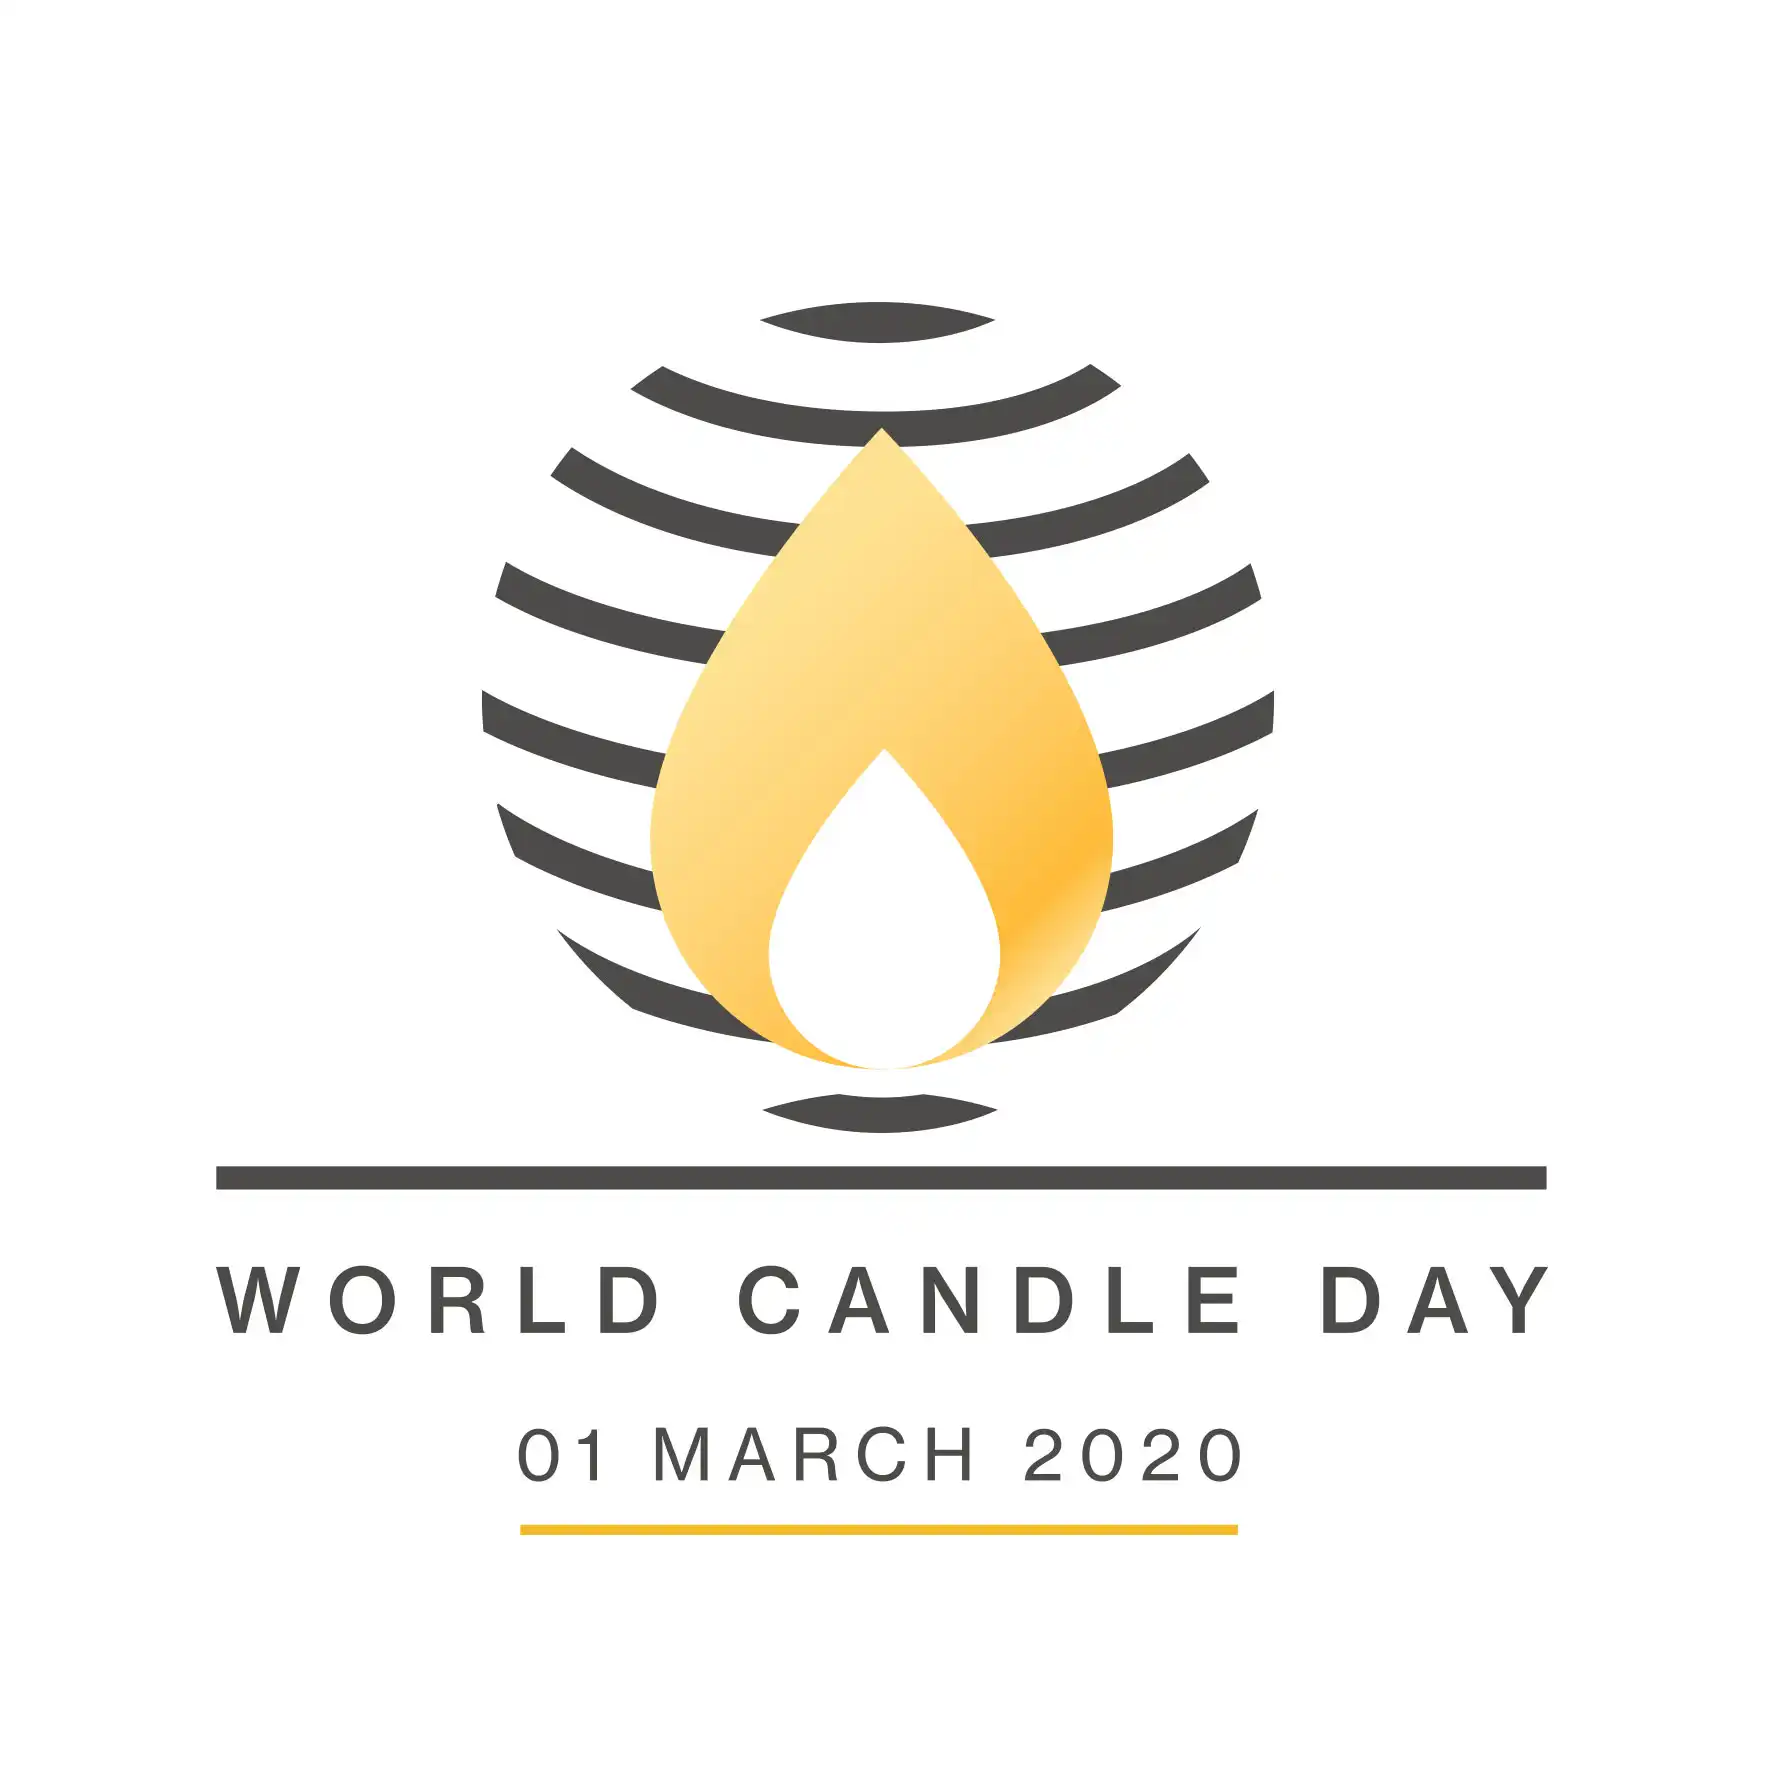 World Candle Day – Event logo